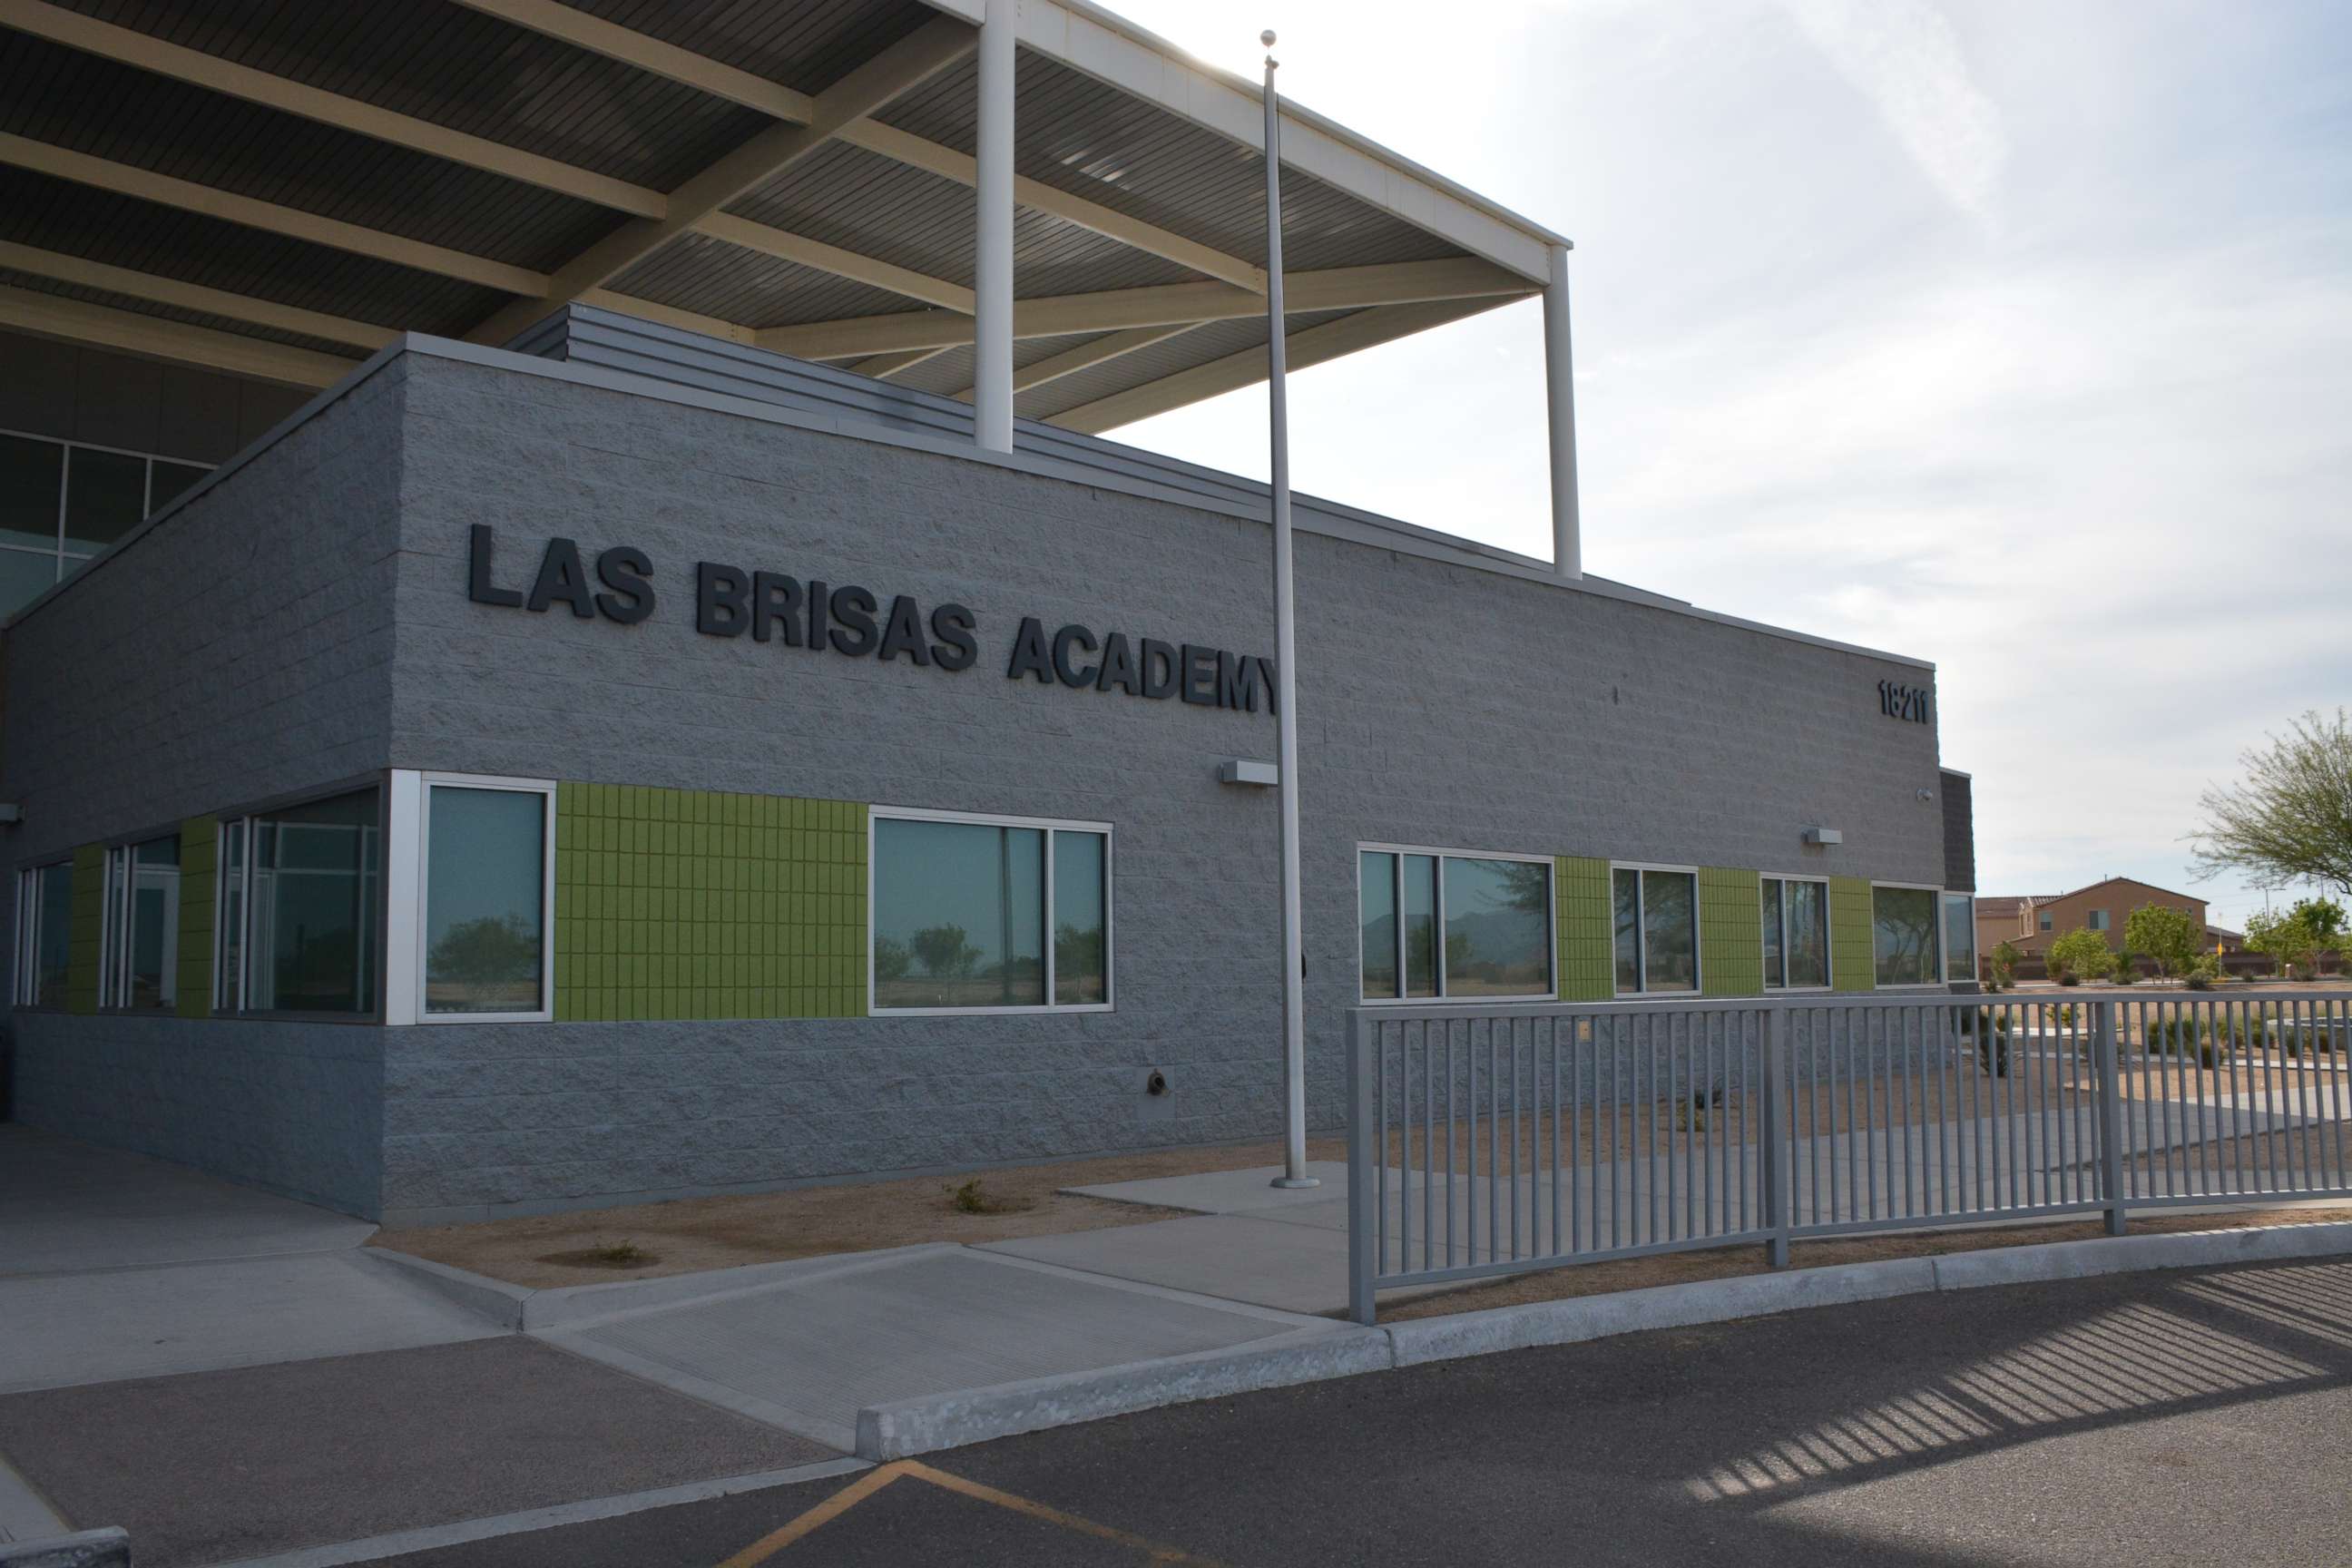 This police photo shows the exterior of the Las Brisas Academy in Goodyear, Arizona. 